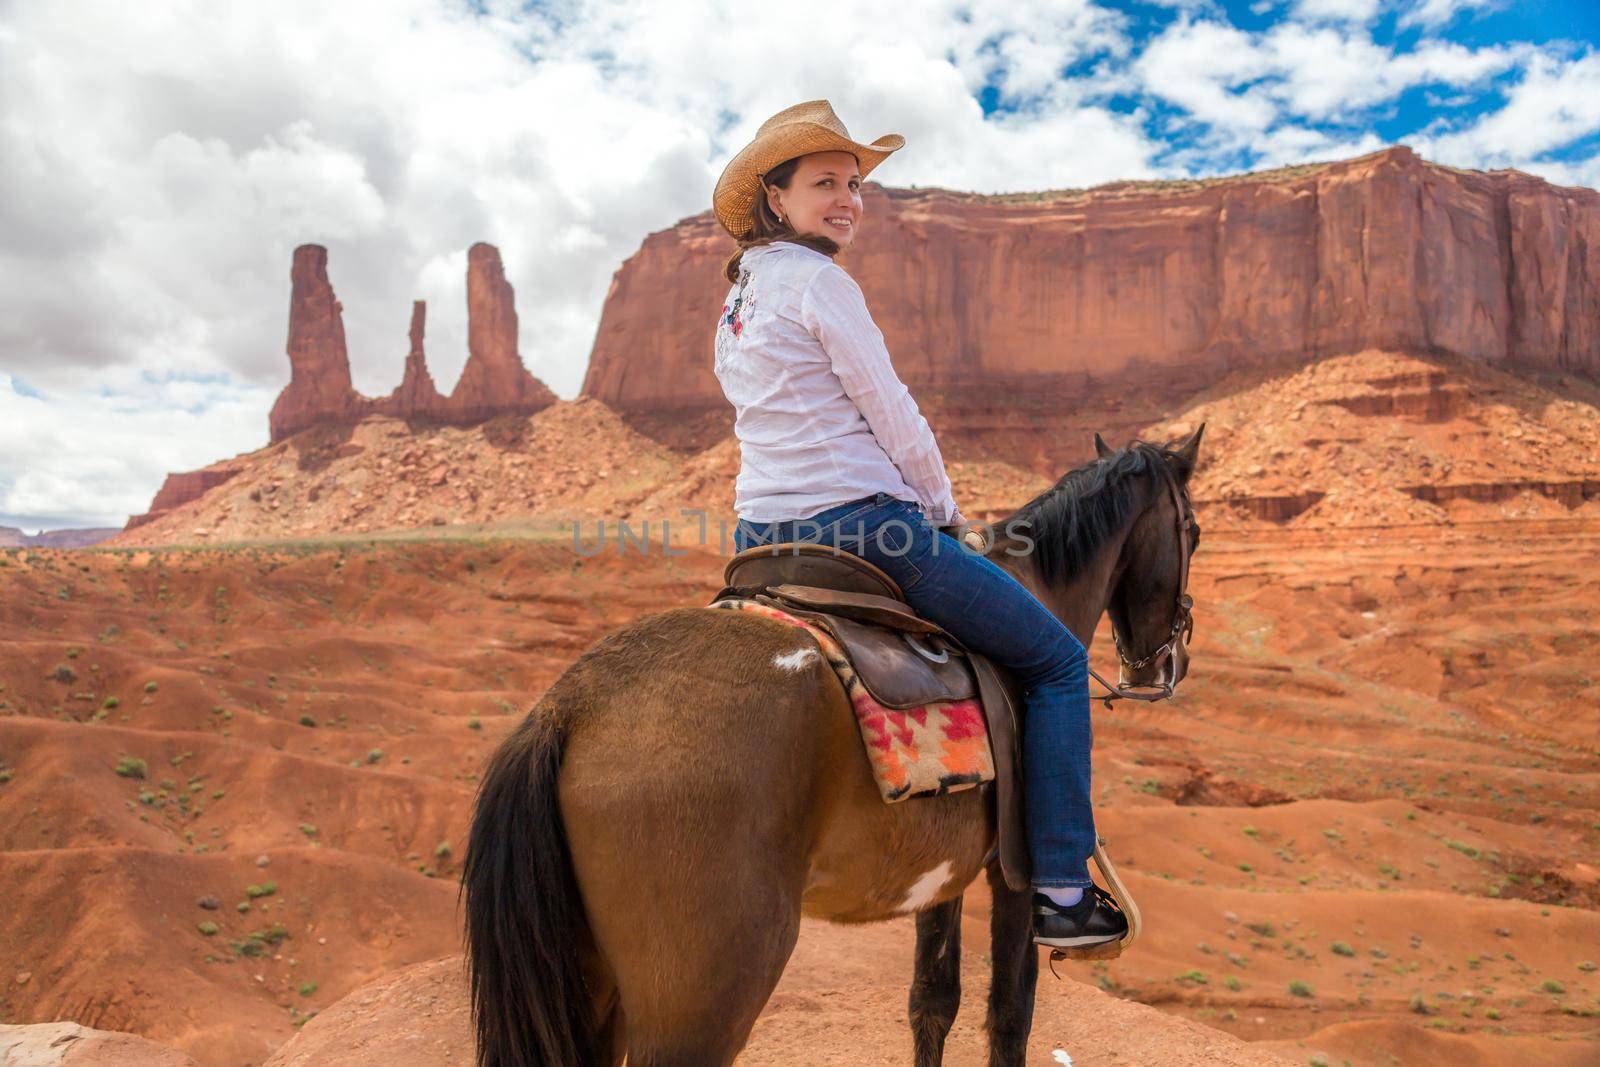 Cowboy woman on a horse in Monument Valley Navajo Tribal Park in USA